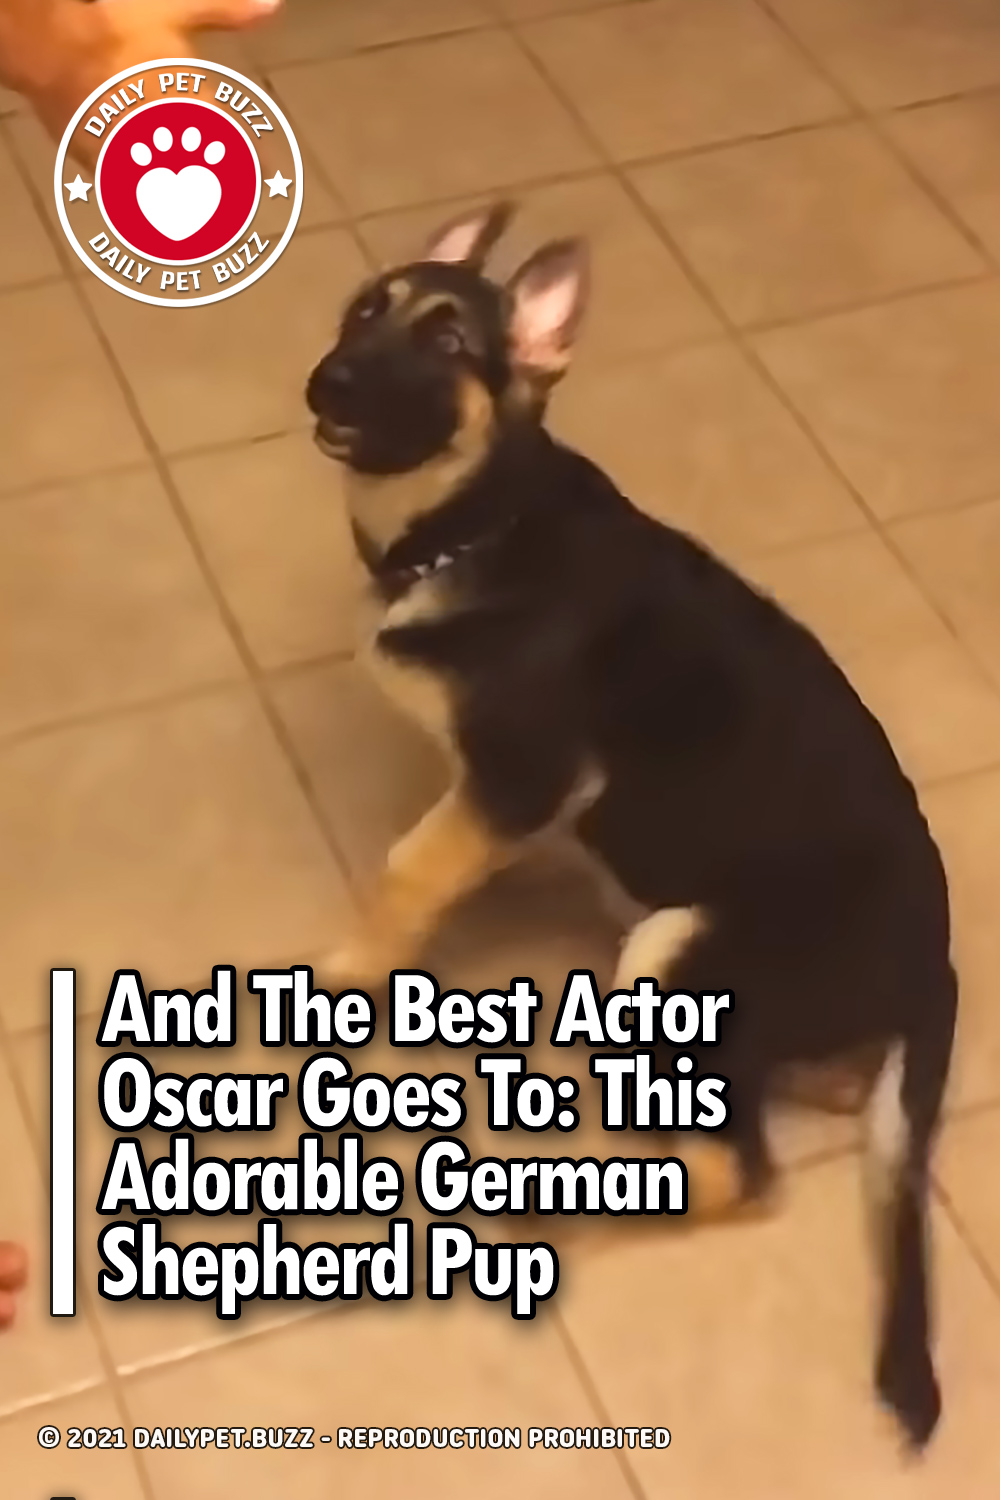 And The Best Actor Oscar Goes To: This Adorable German Shepherd Pup